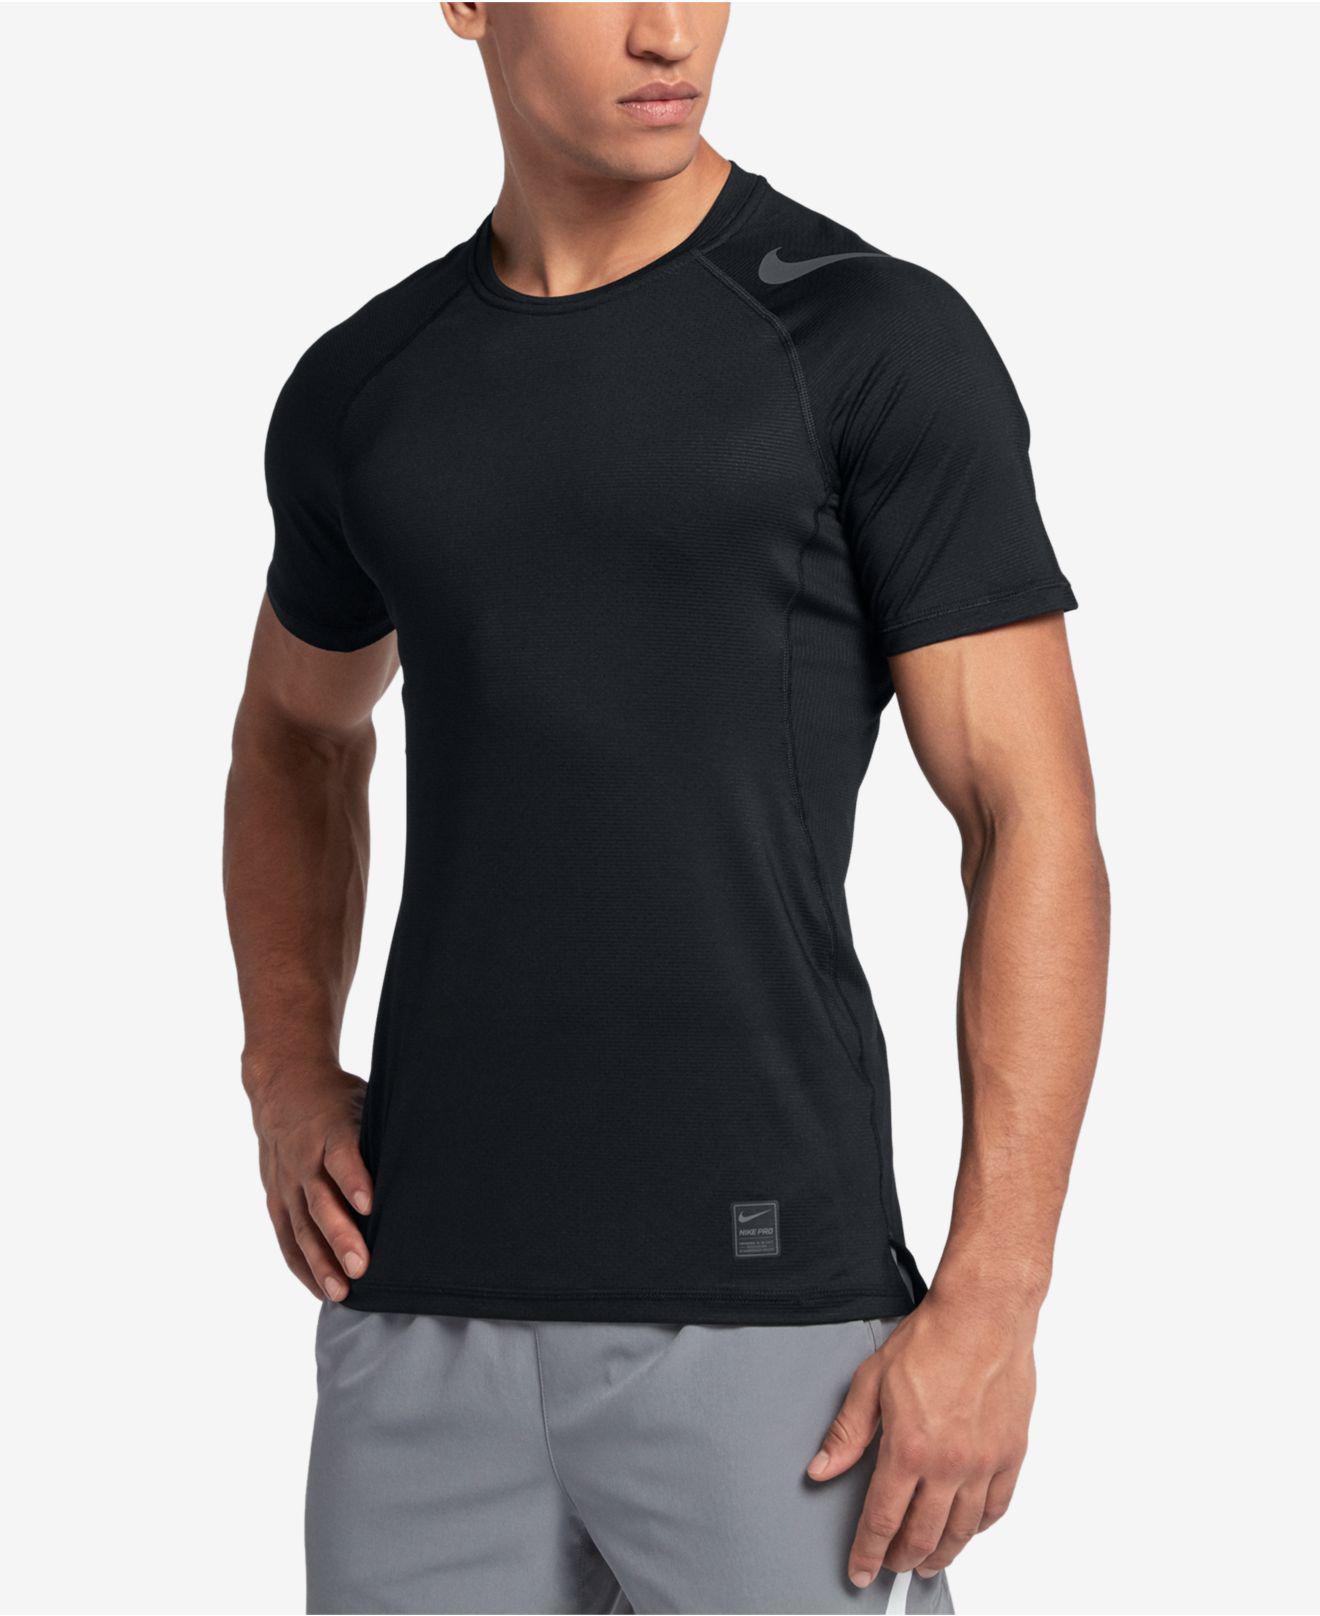 Nike Pro Hypercool Fitted T-shirt in Black for Men | Lyst